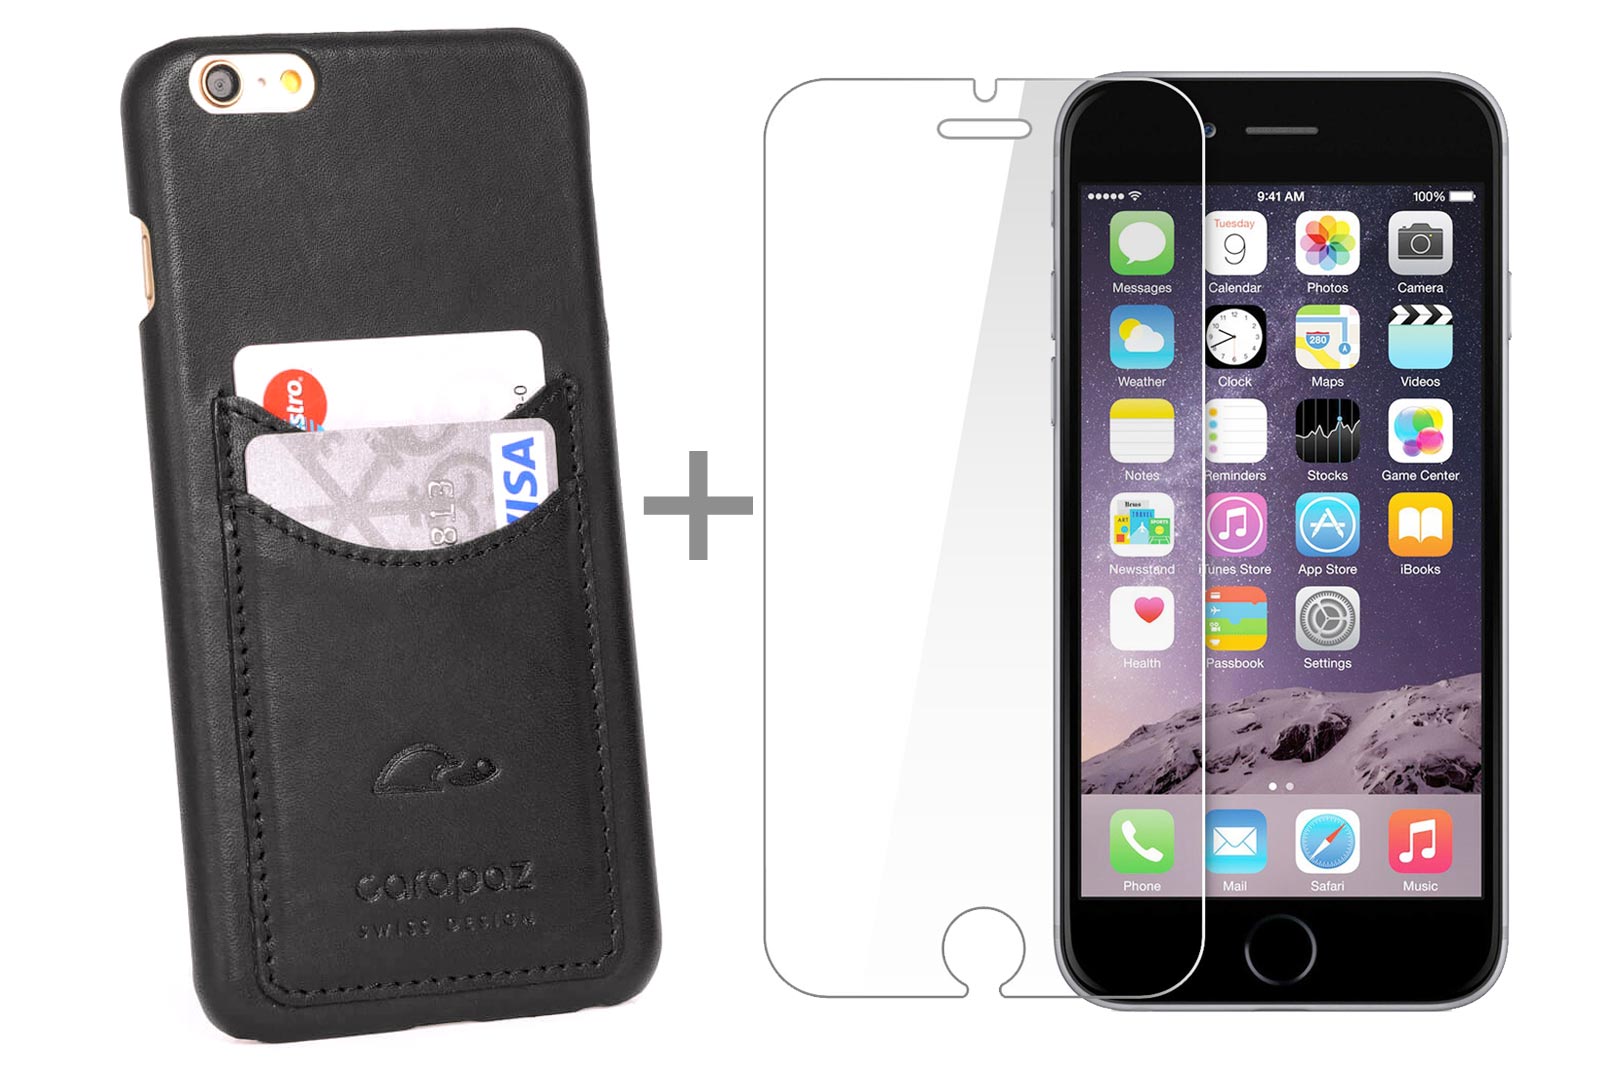 Black leather cover iPhone 6 Plus - cards slots - screen protection glass - Carapaz